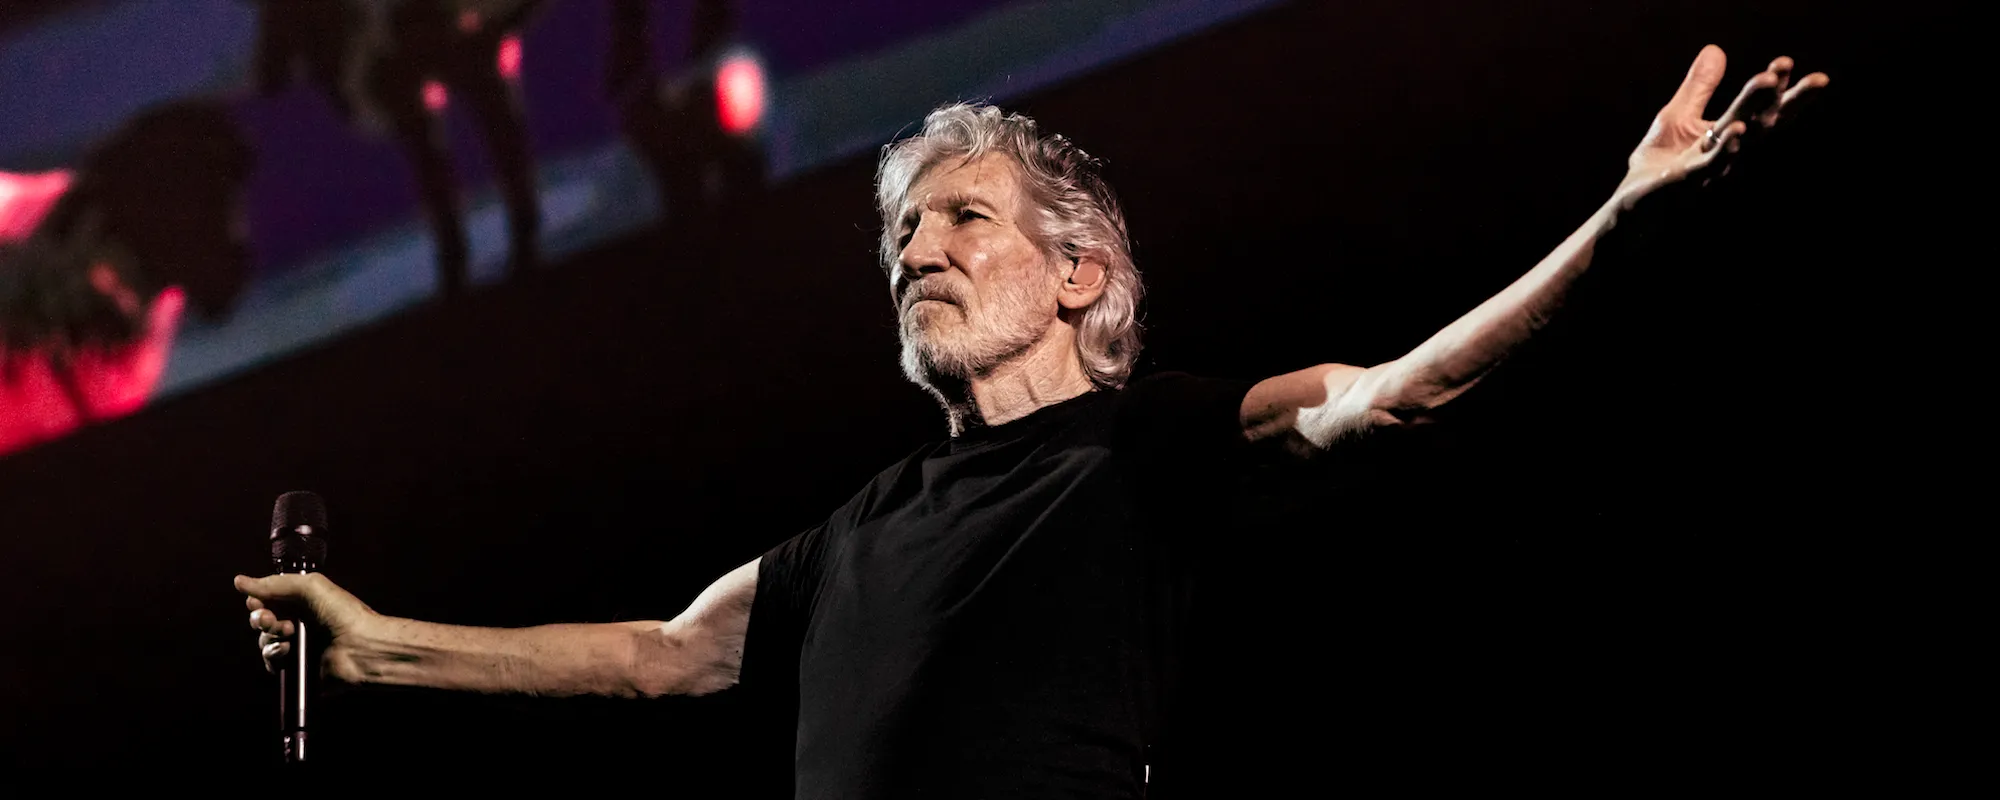 Biden Administration Calls Roger Waters' Show "Deeply Offensive"